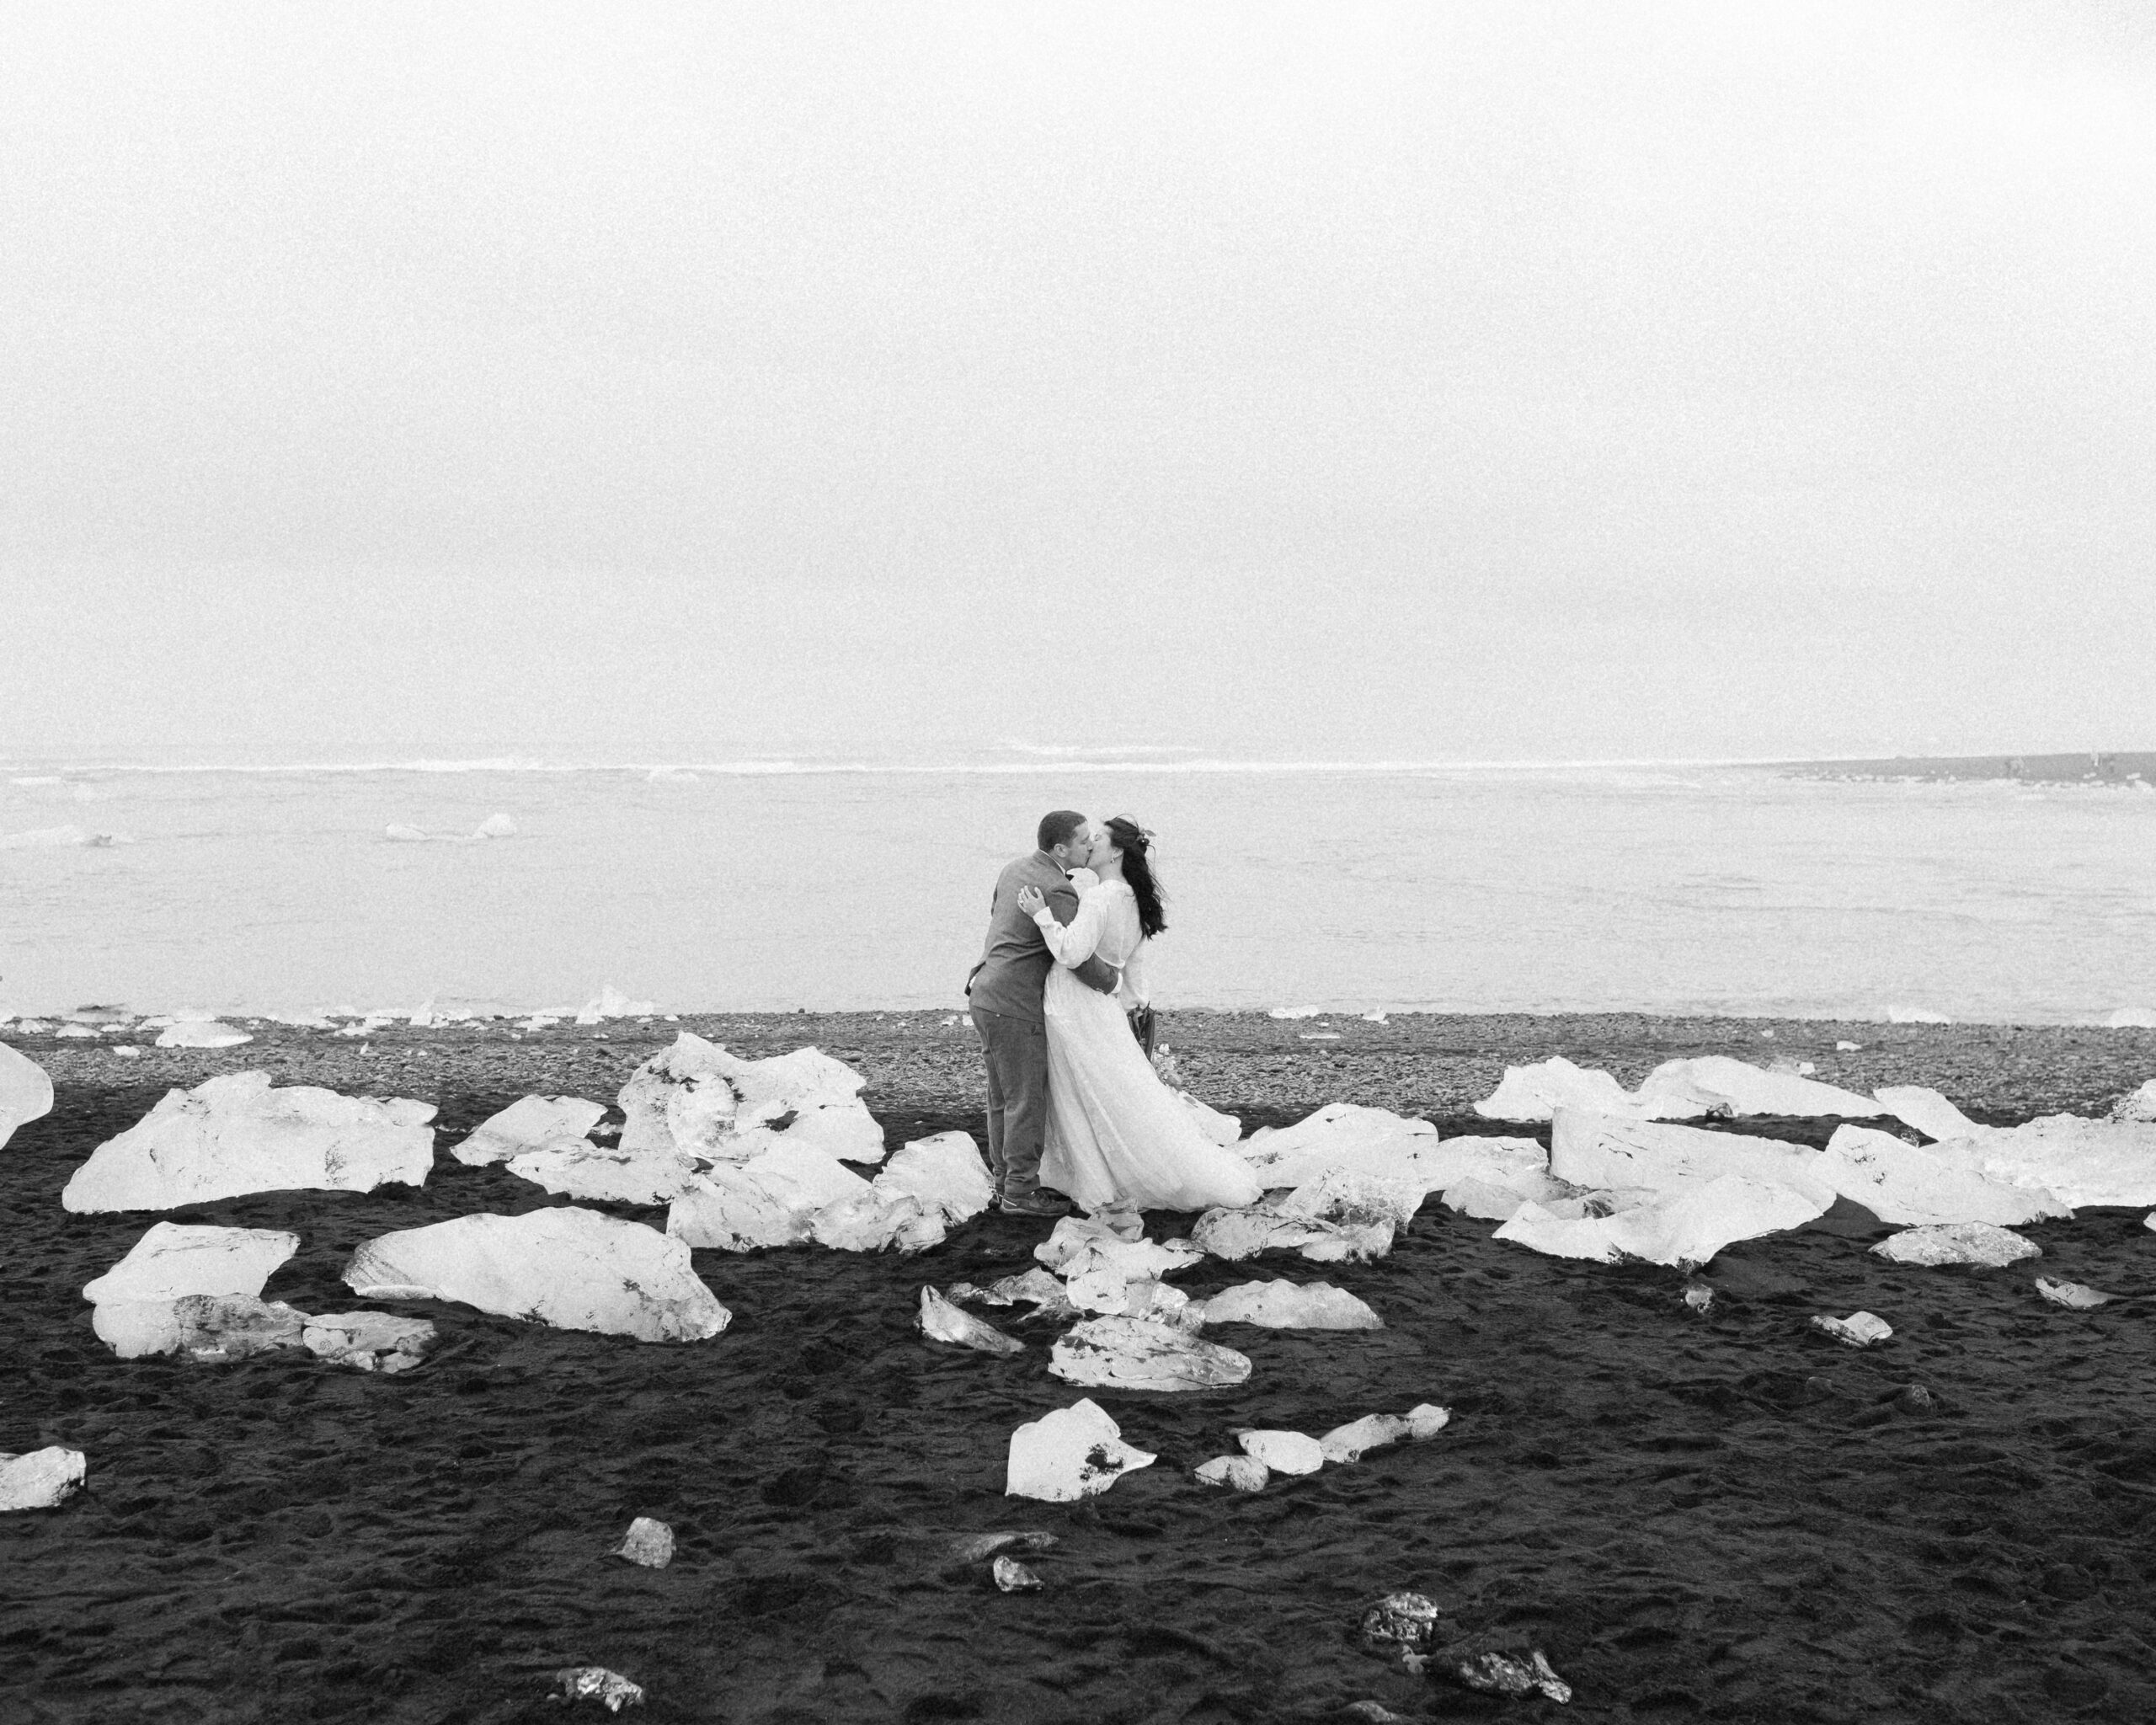 A couple is seen holding one another in wedding attire on an Icelandic black sand beach.